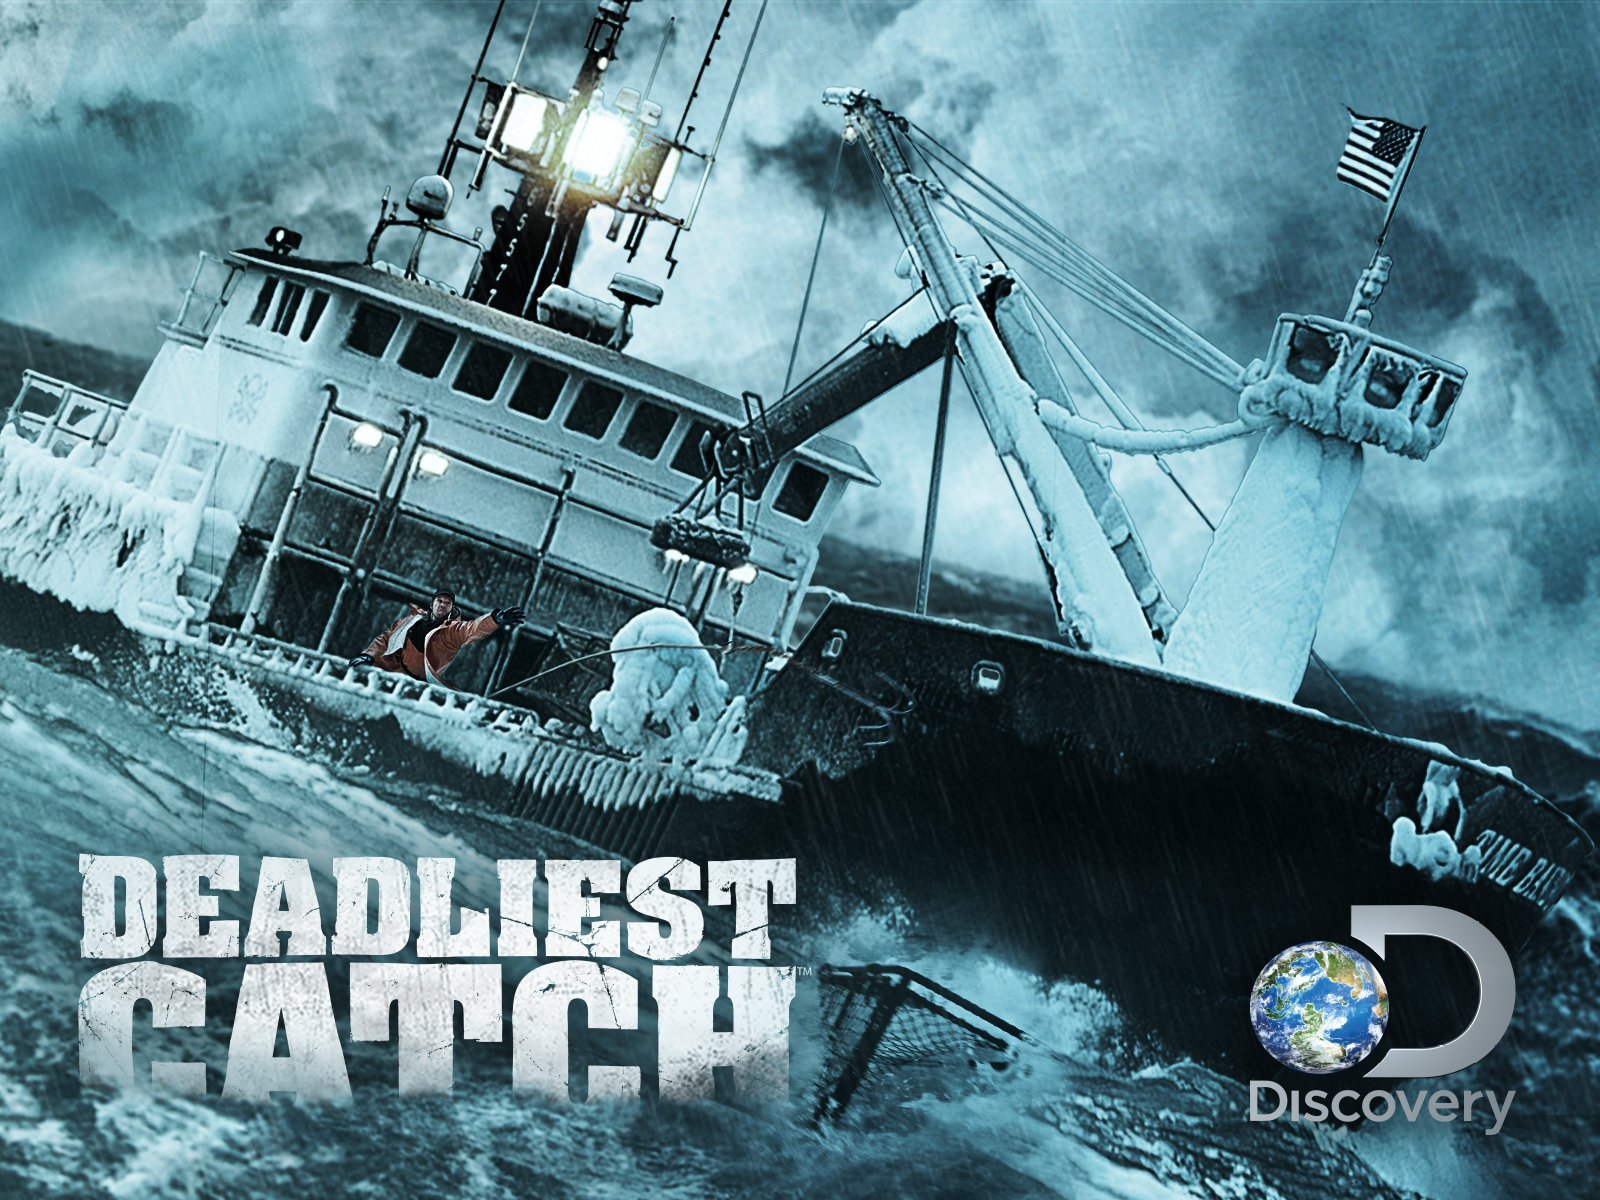 ‘Deadliest Catch’ Exclusive: Season 17 Finale with the Worst Is Yet To Come